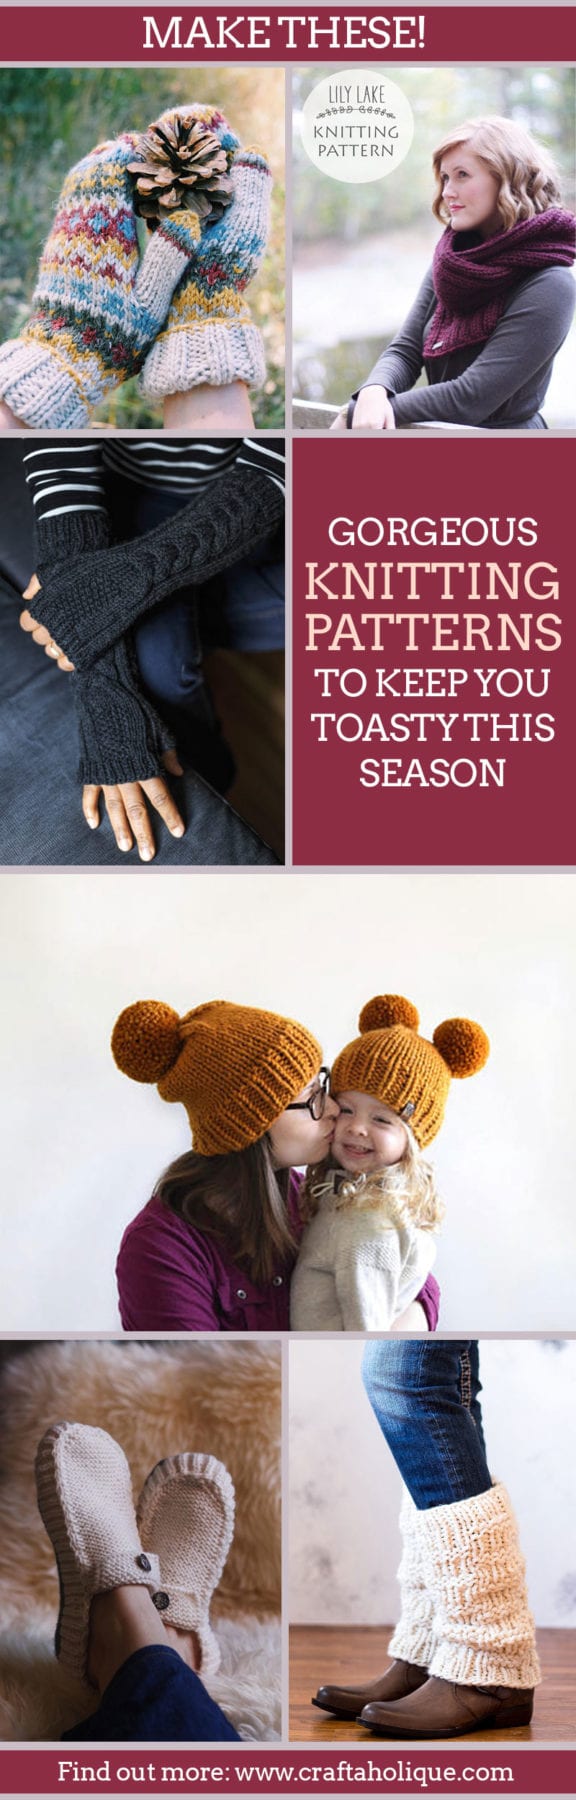 Autumn winter knitting patterns - knitted bobble hat, knitted leg warmers, knitted mittens and more